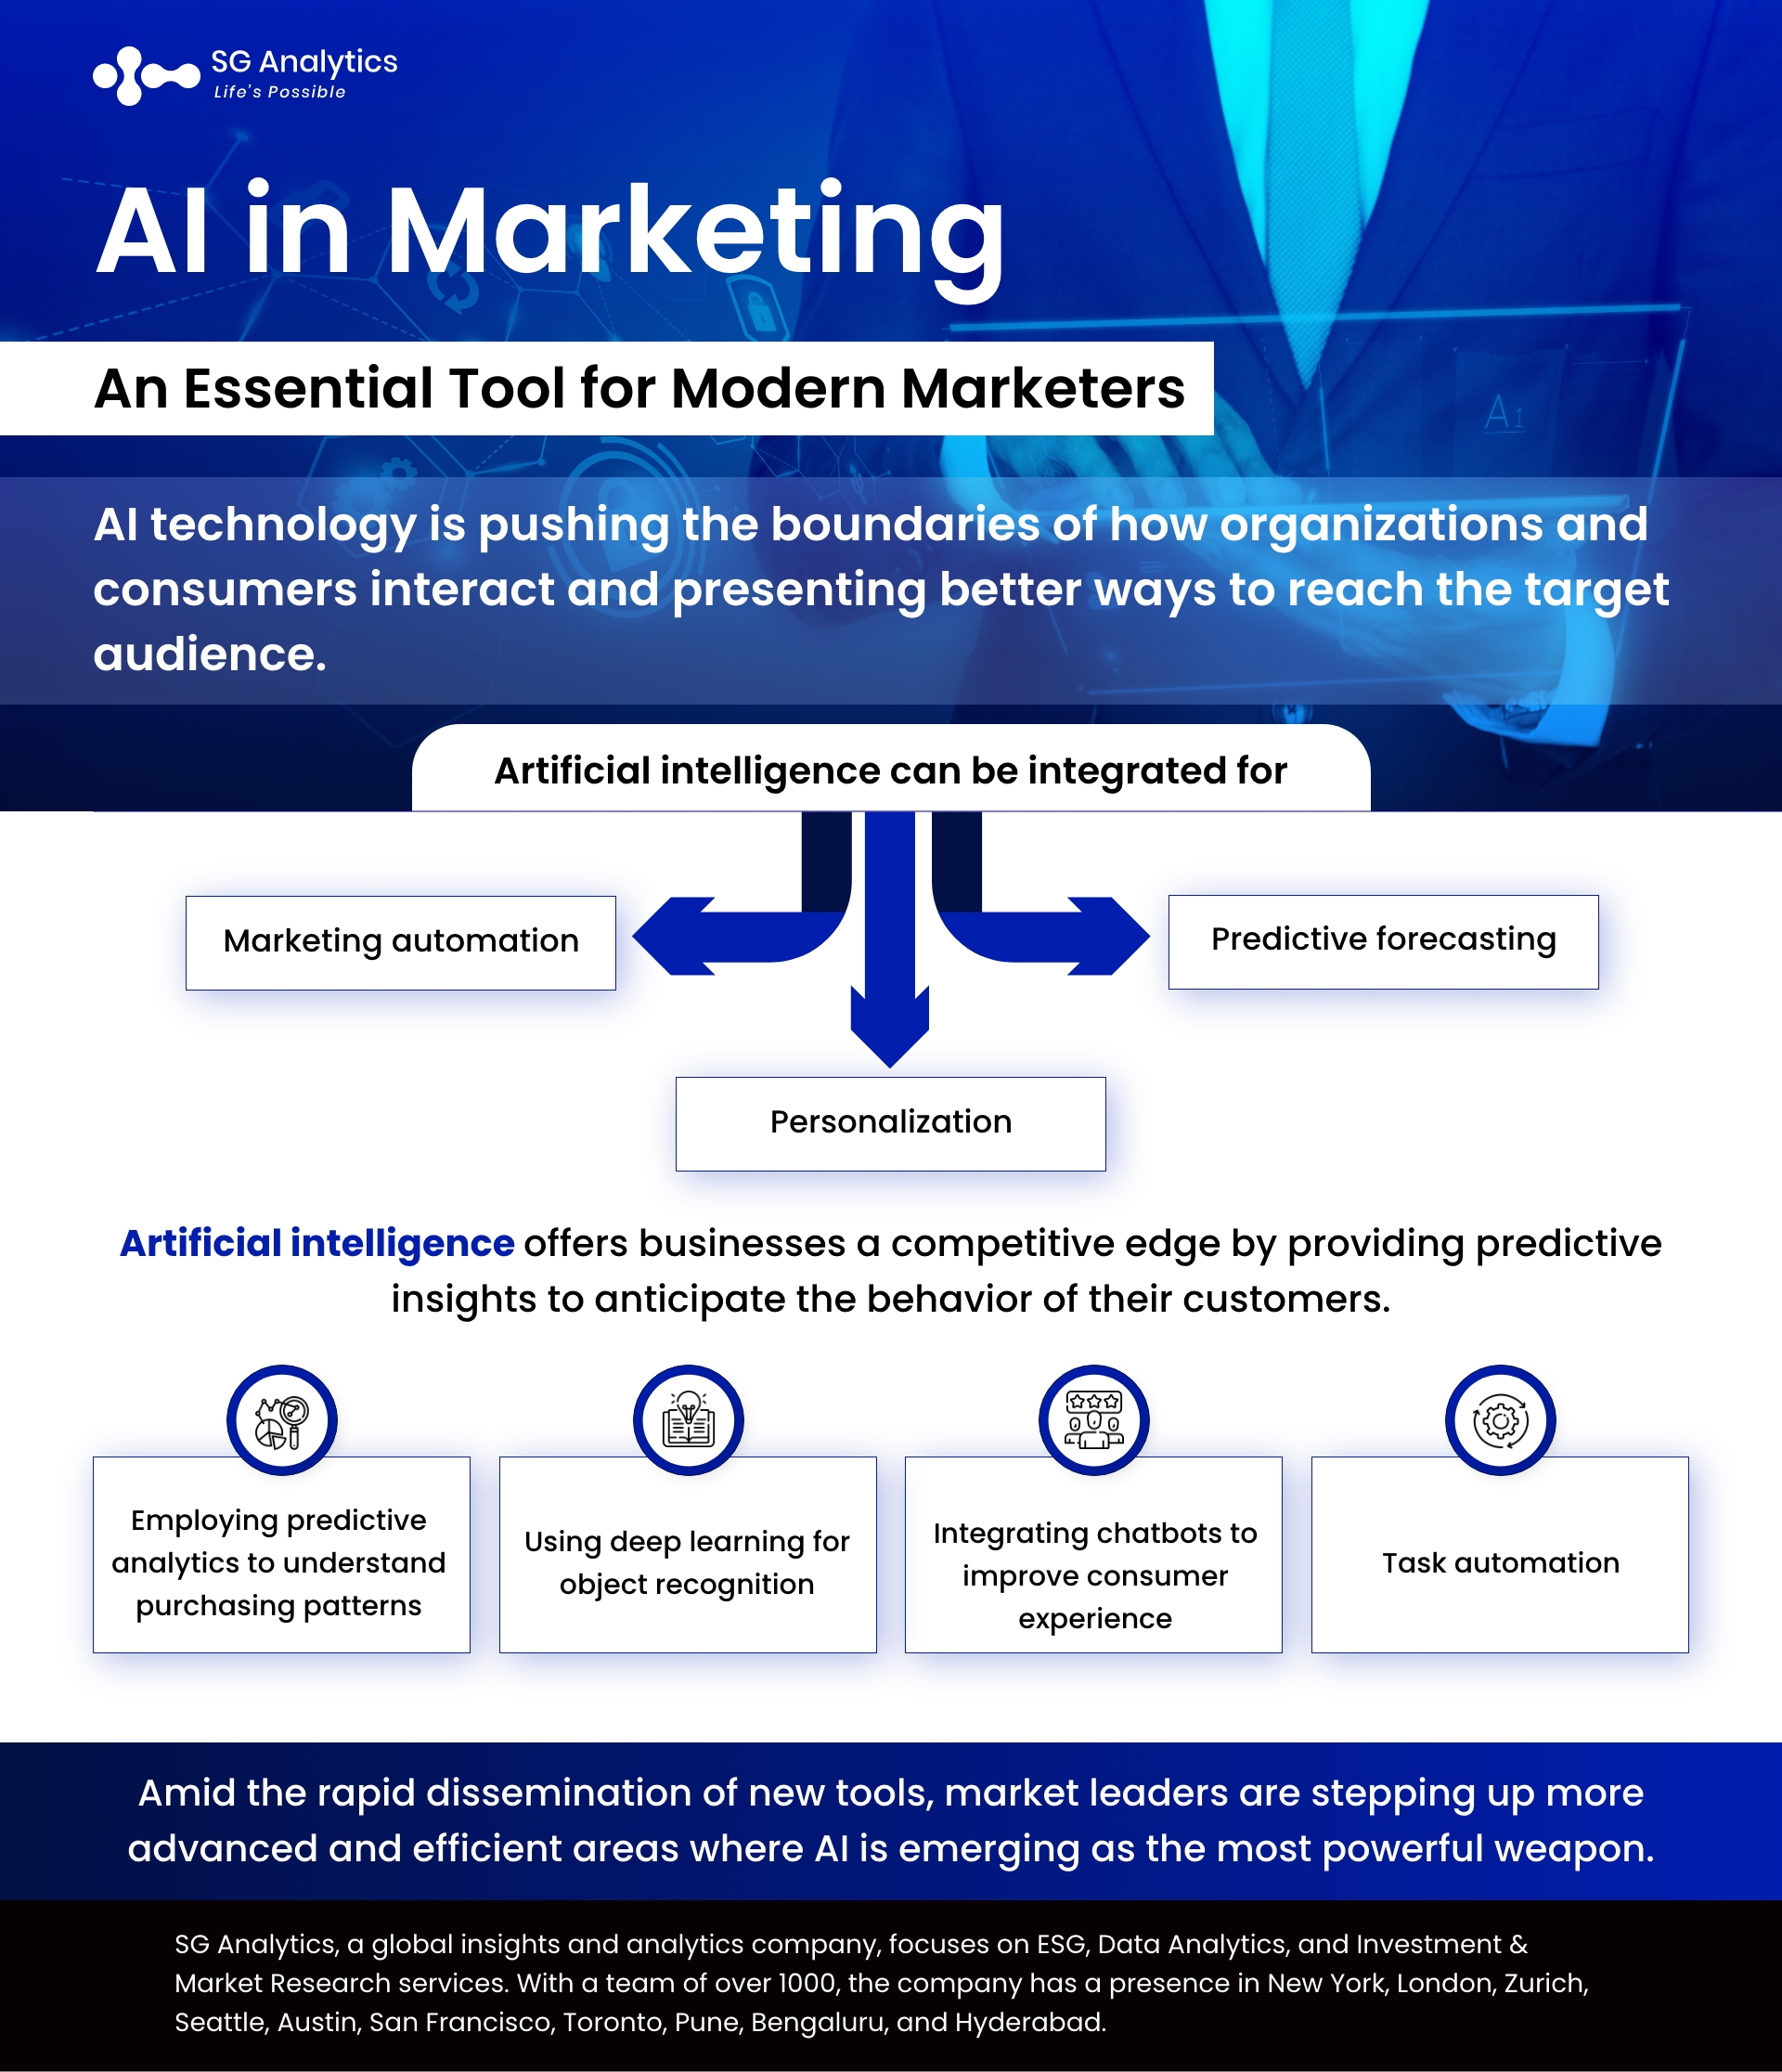 AI in Marketing - An Essential Tool for Modern Marketers 